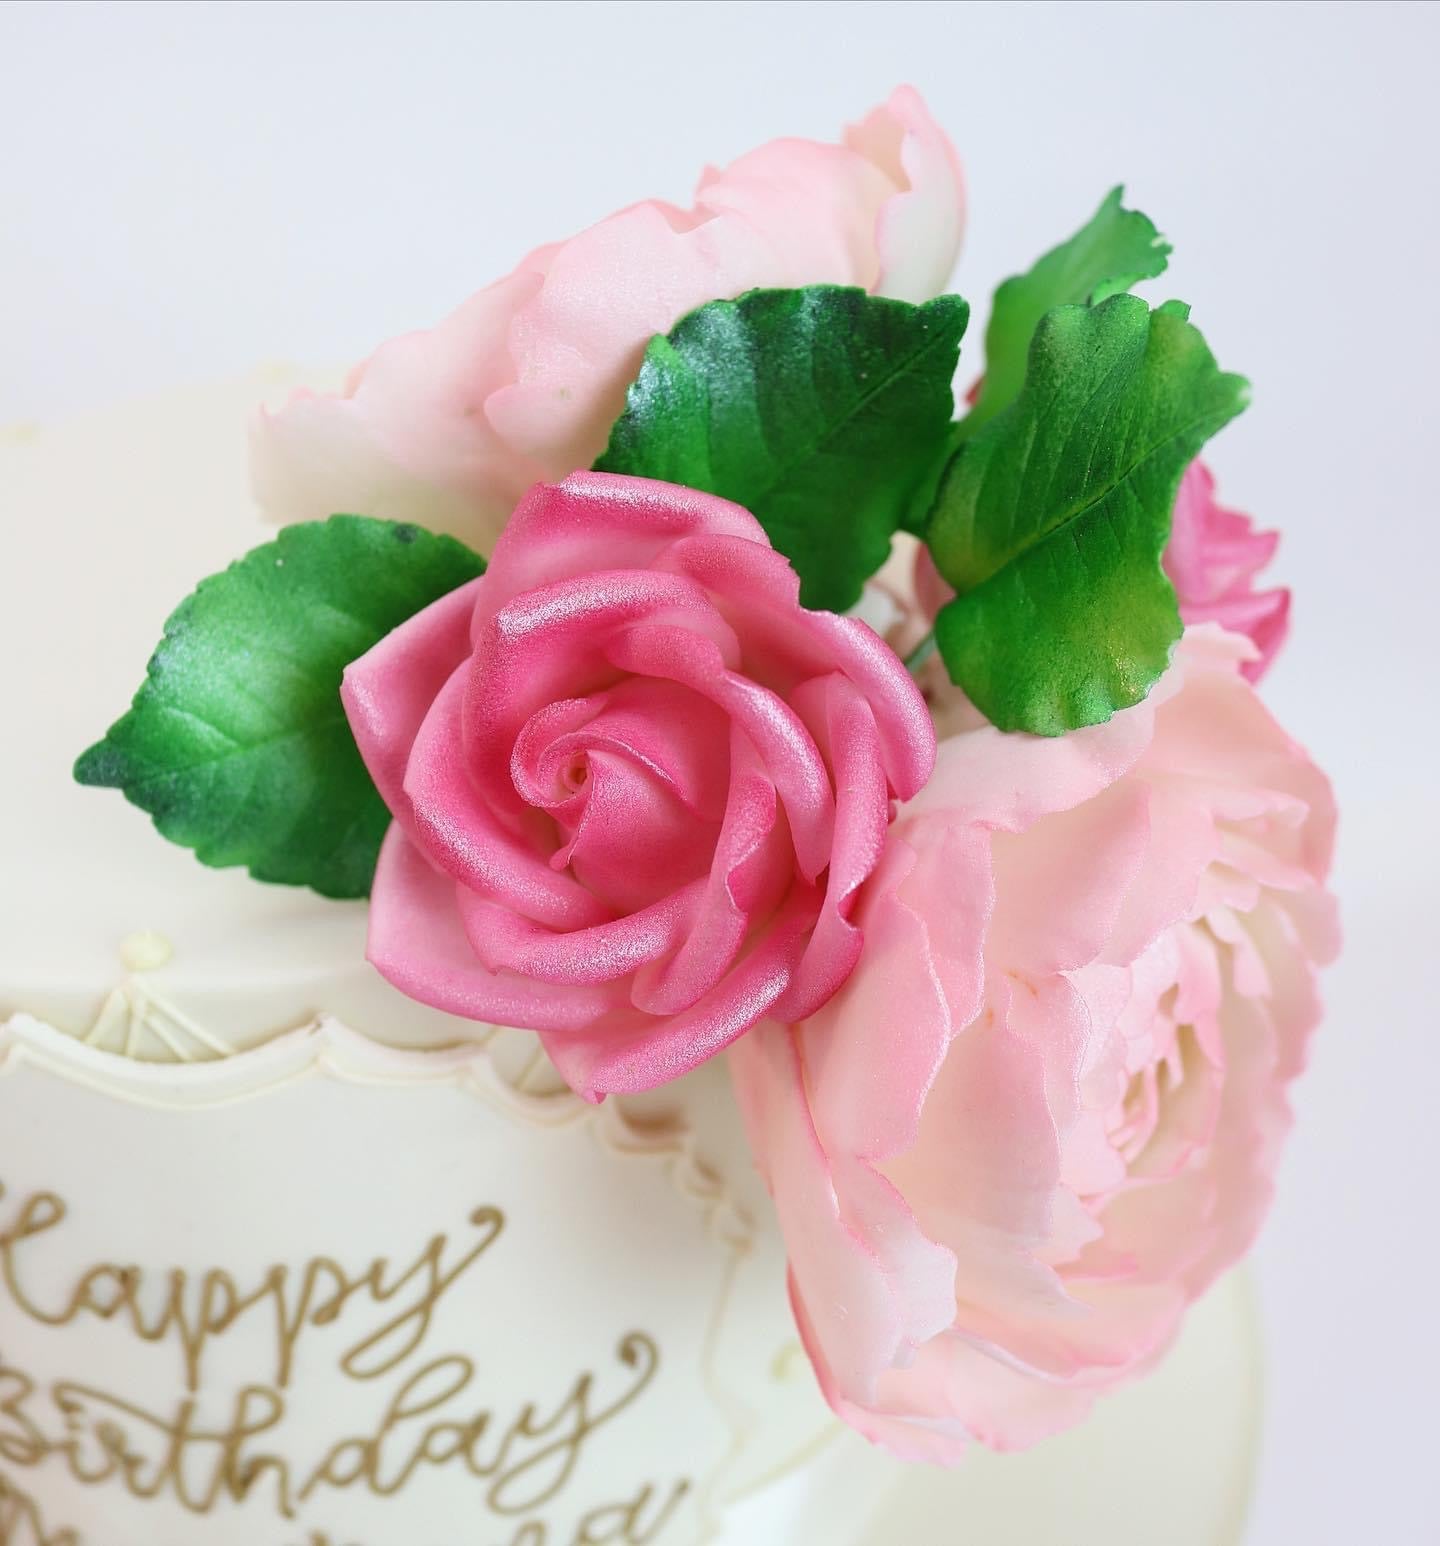 Birthday Cake Memorial Flowers | Silky Bouquets